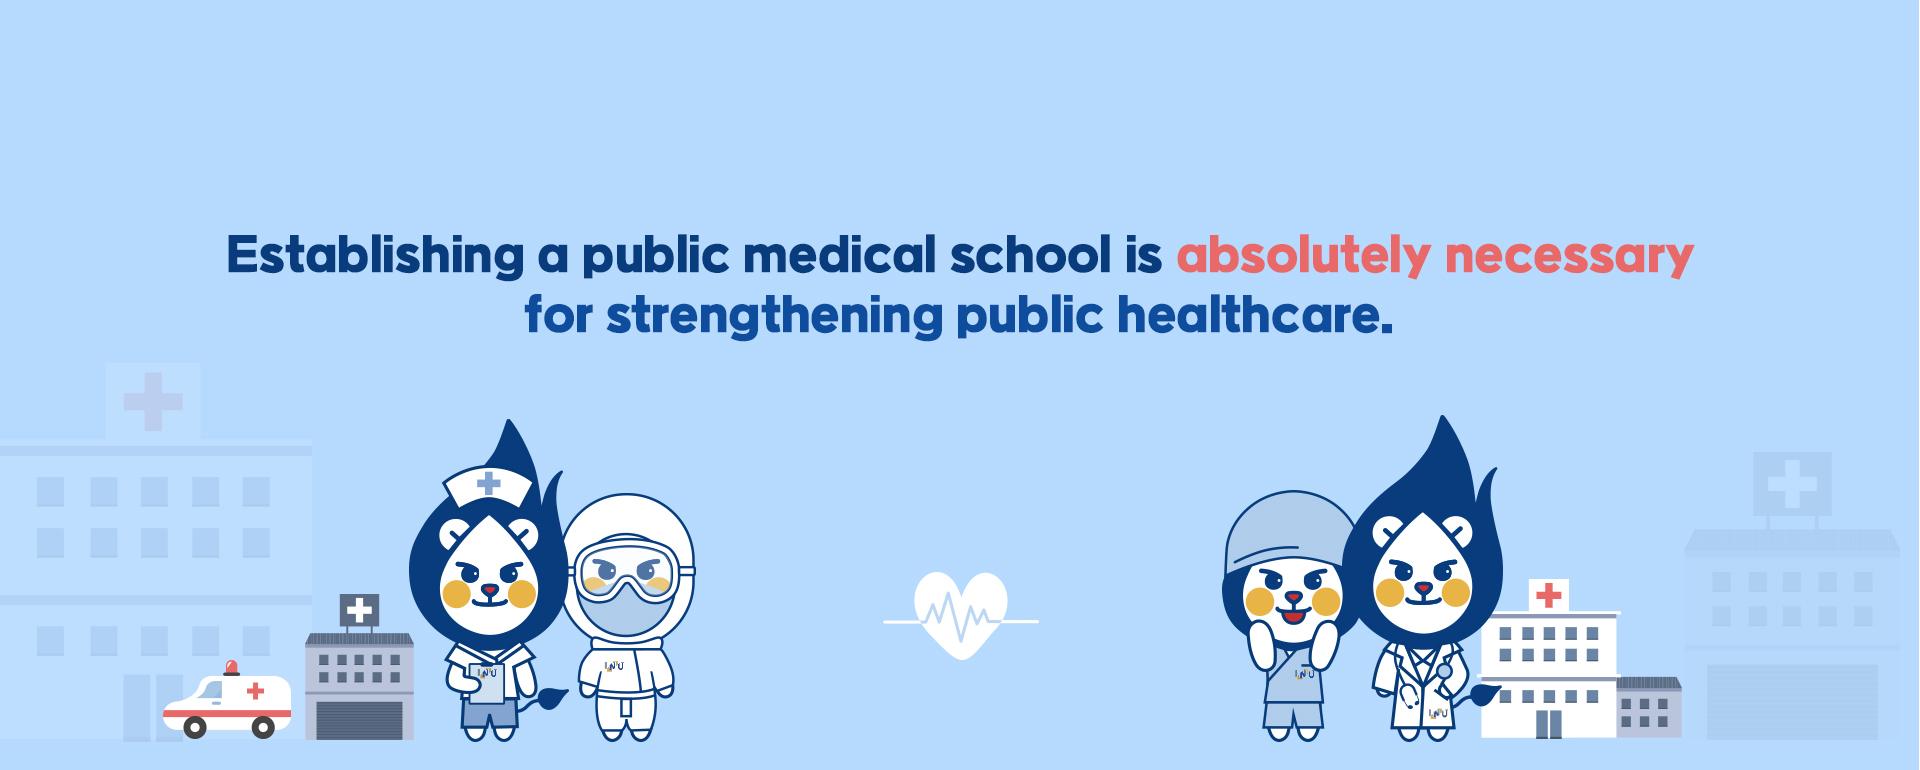 Establishing a public medical school is absolutely necessary for strengthening public healthcare